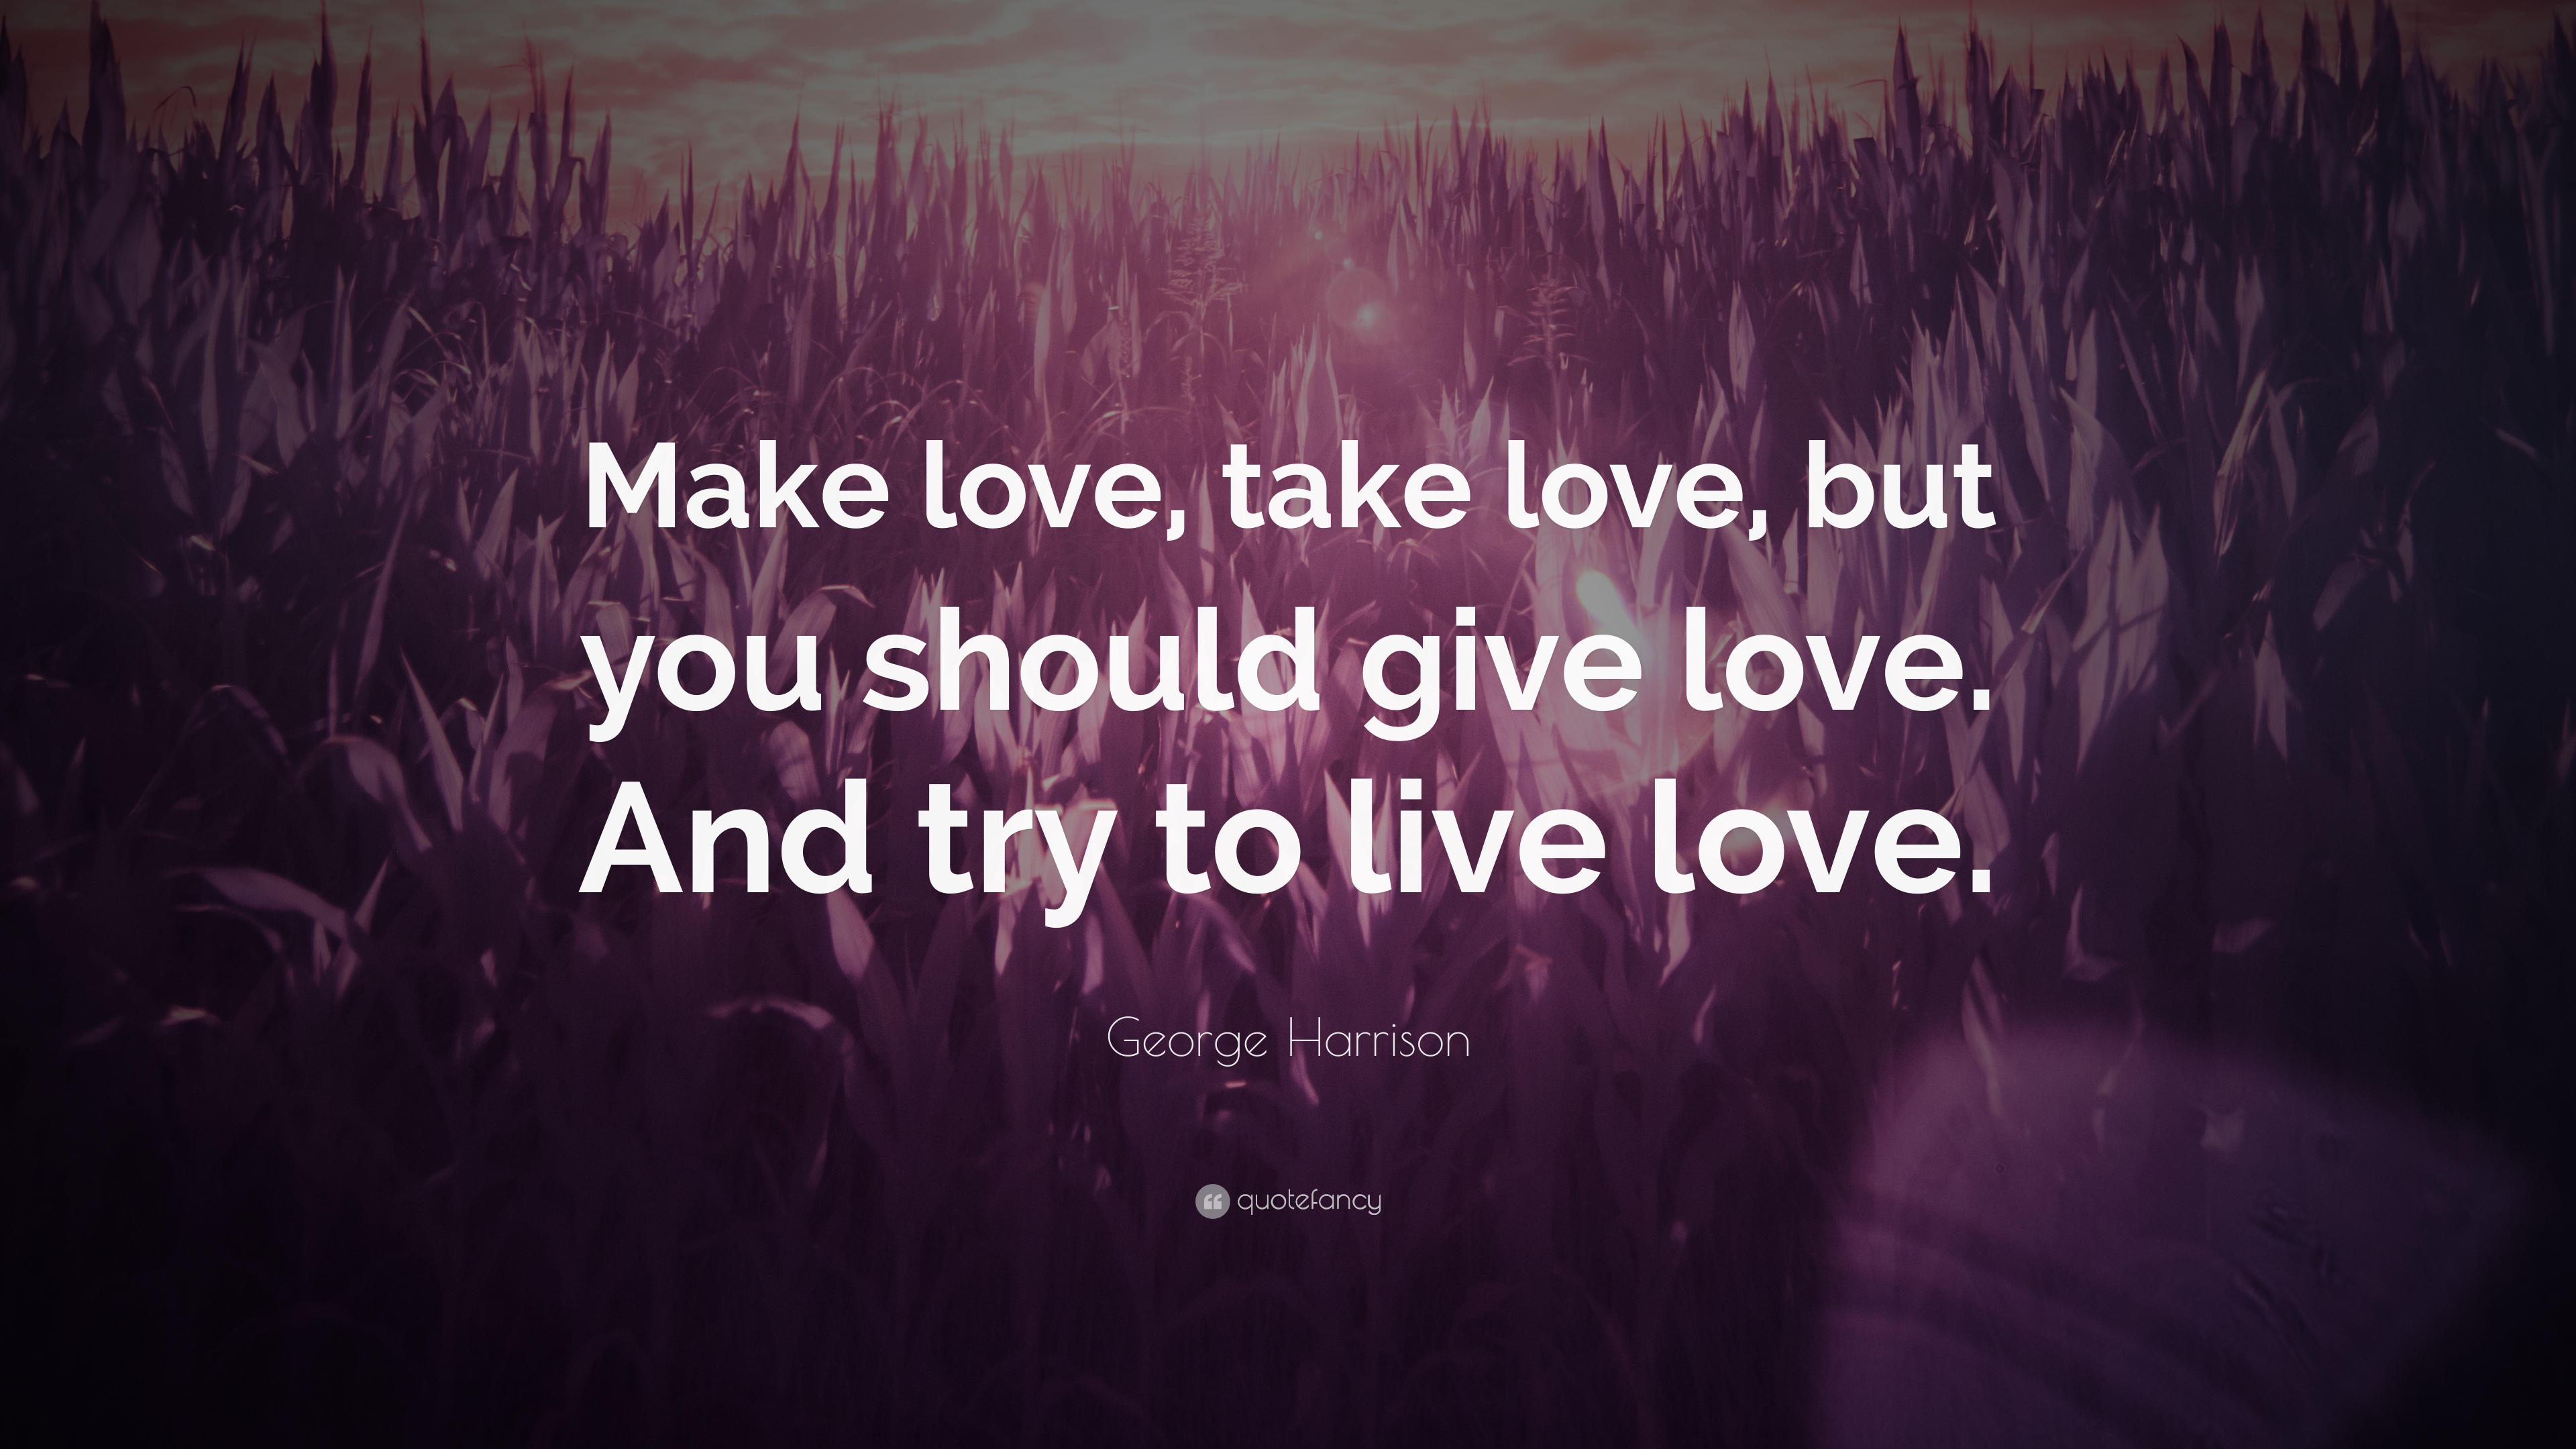 7 George Harrison Quotes About Love